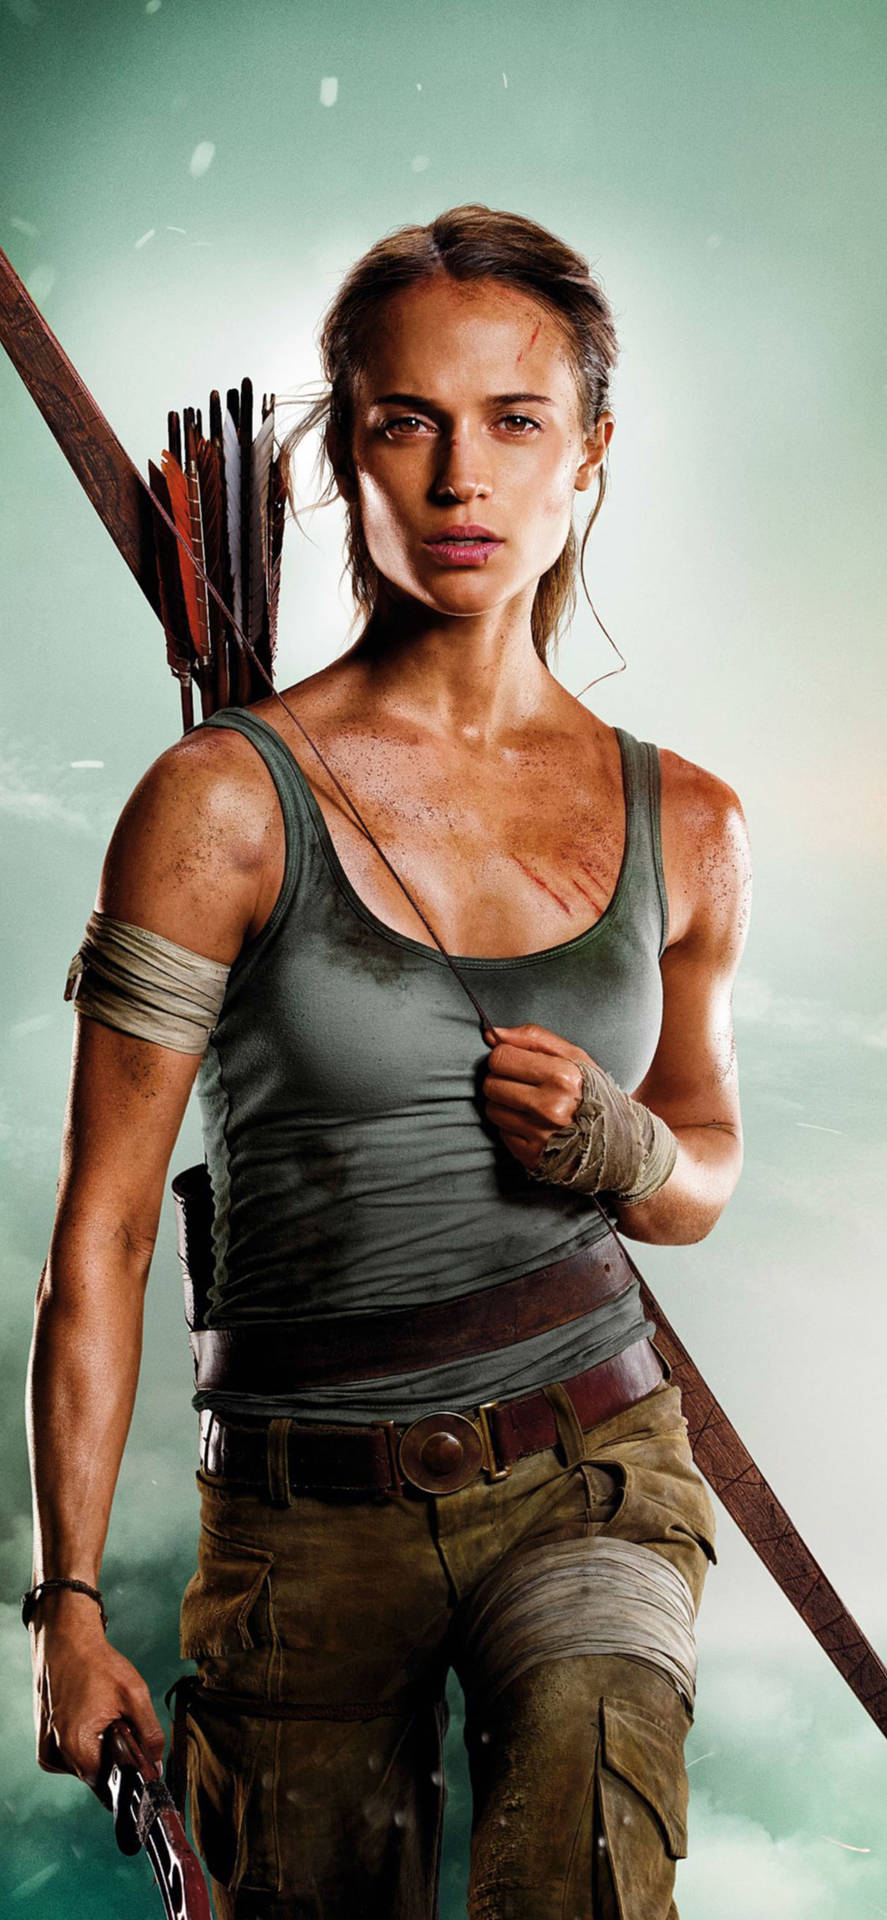 Lara Croft at her best with her trusty weapon and an iPhone! Wallpaper